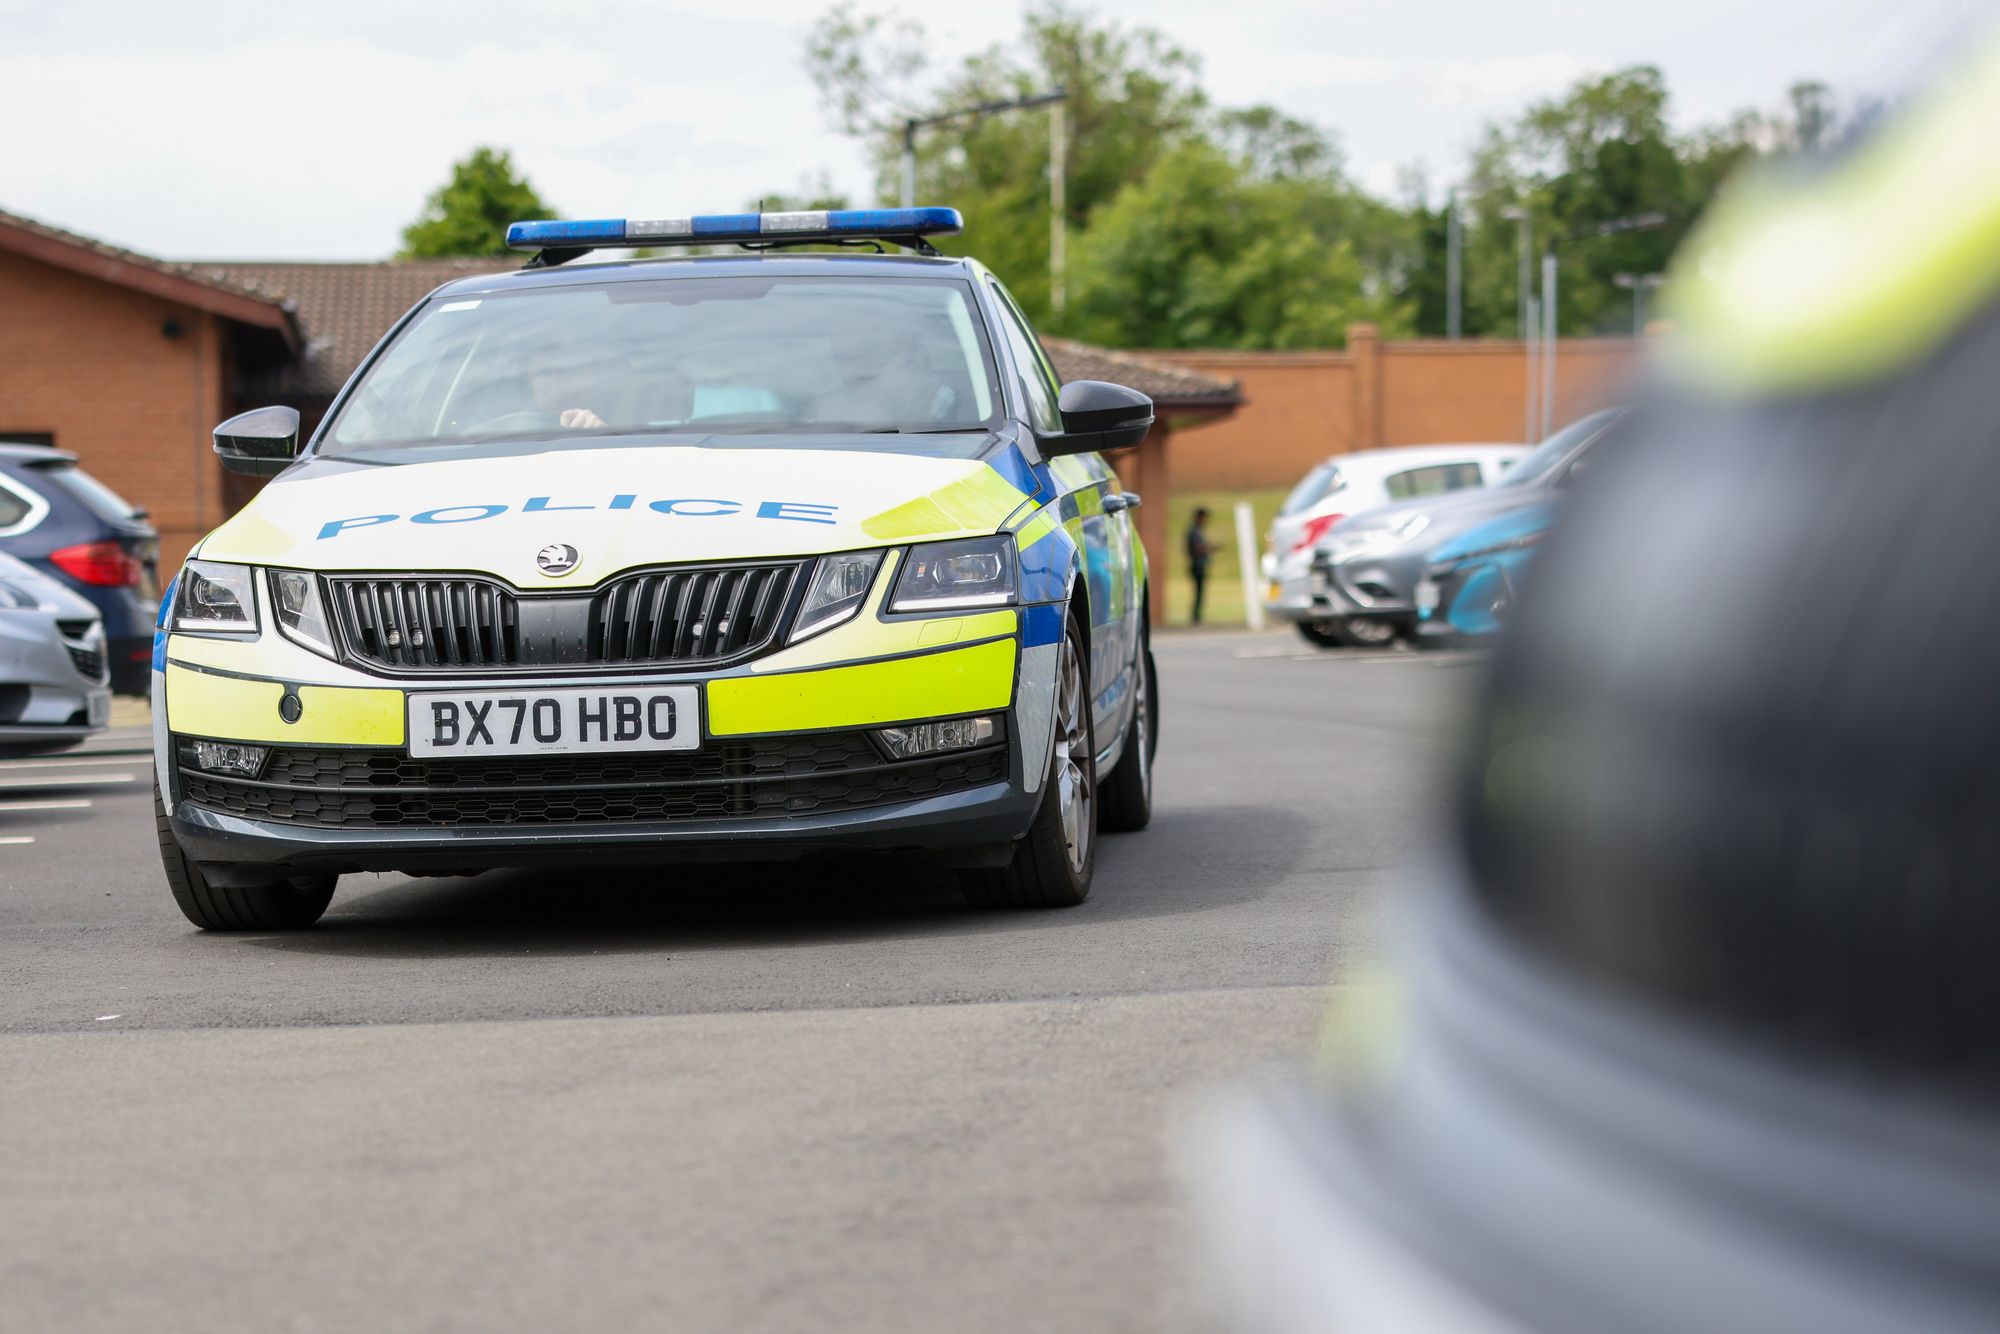 A police vehicle © Leicestershire Police